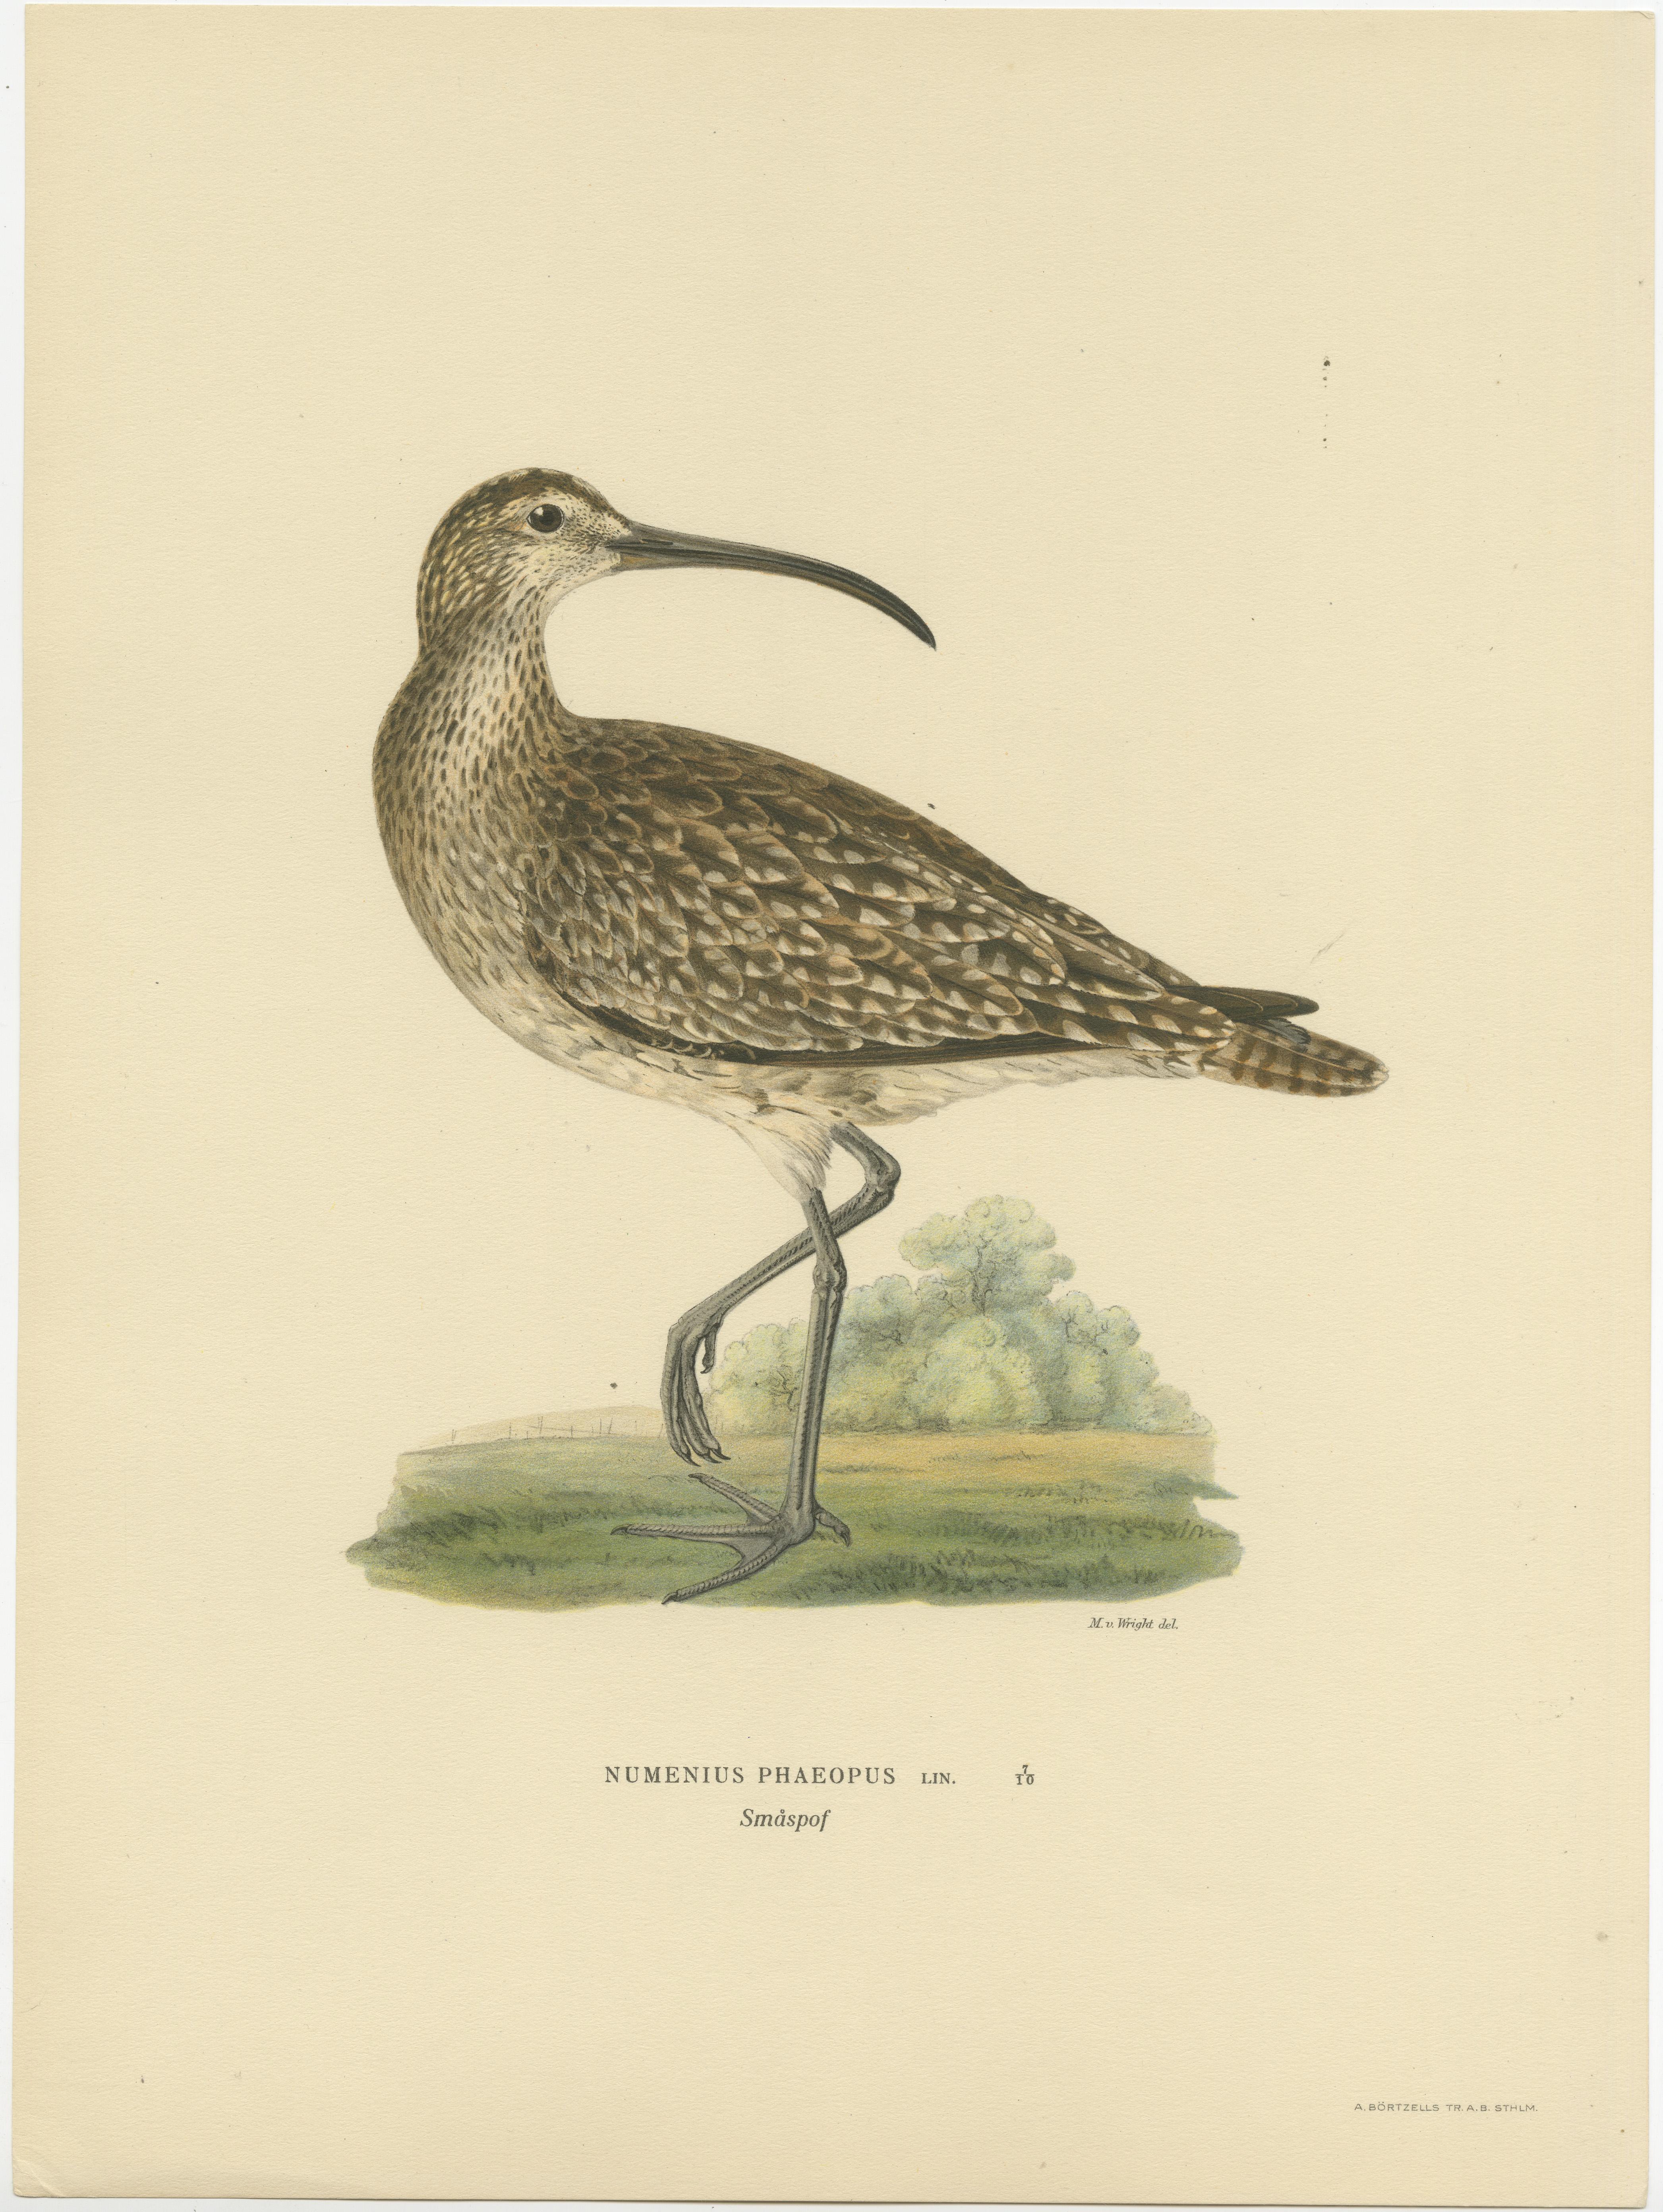 This original old print titled 'Numenius Phaeopus' portrays the Eurasian Whimbrel, a bird recognized by its long, decurved bill and mottled brown plumage, which serves as camouflage in its natural habitat. The bird is often seen in coastal regions,